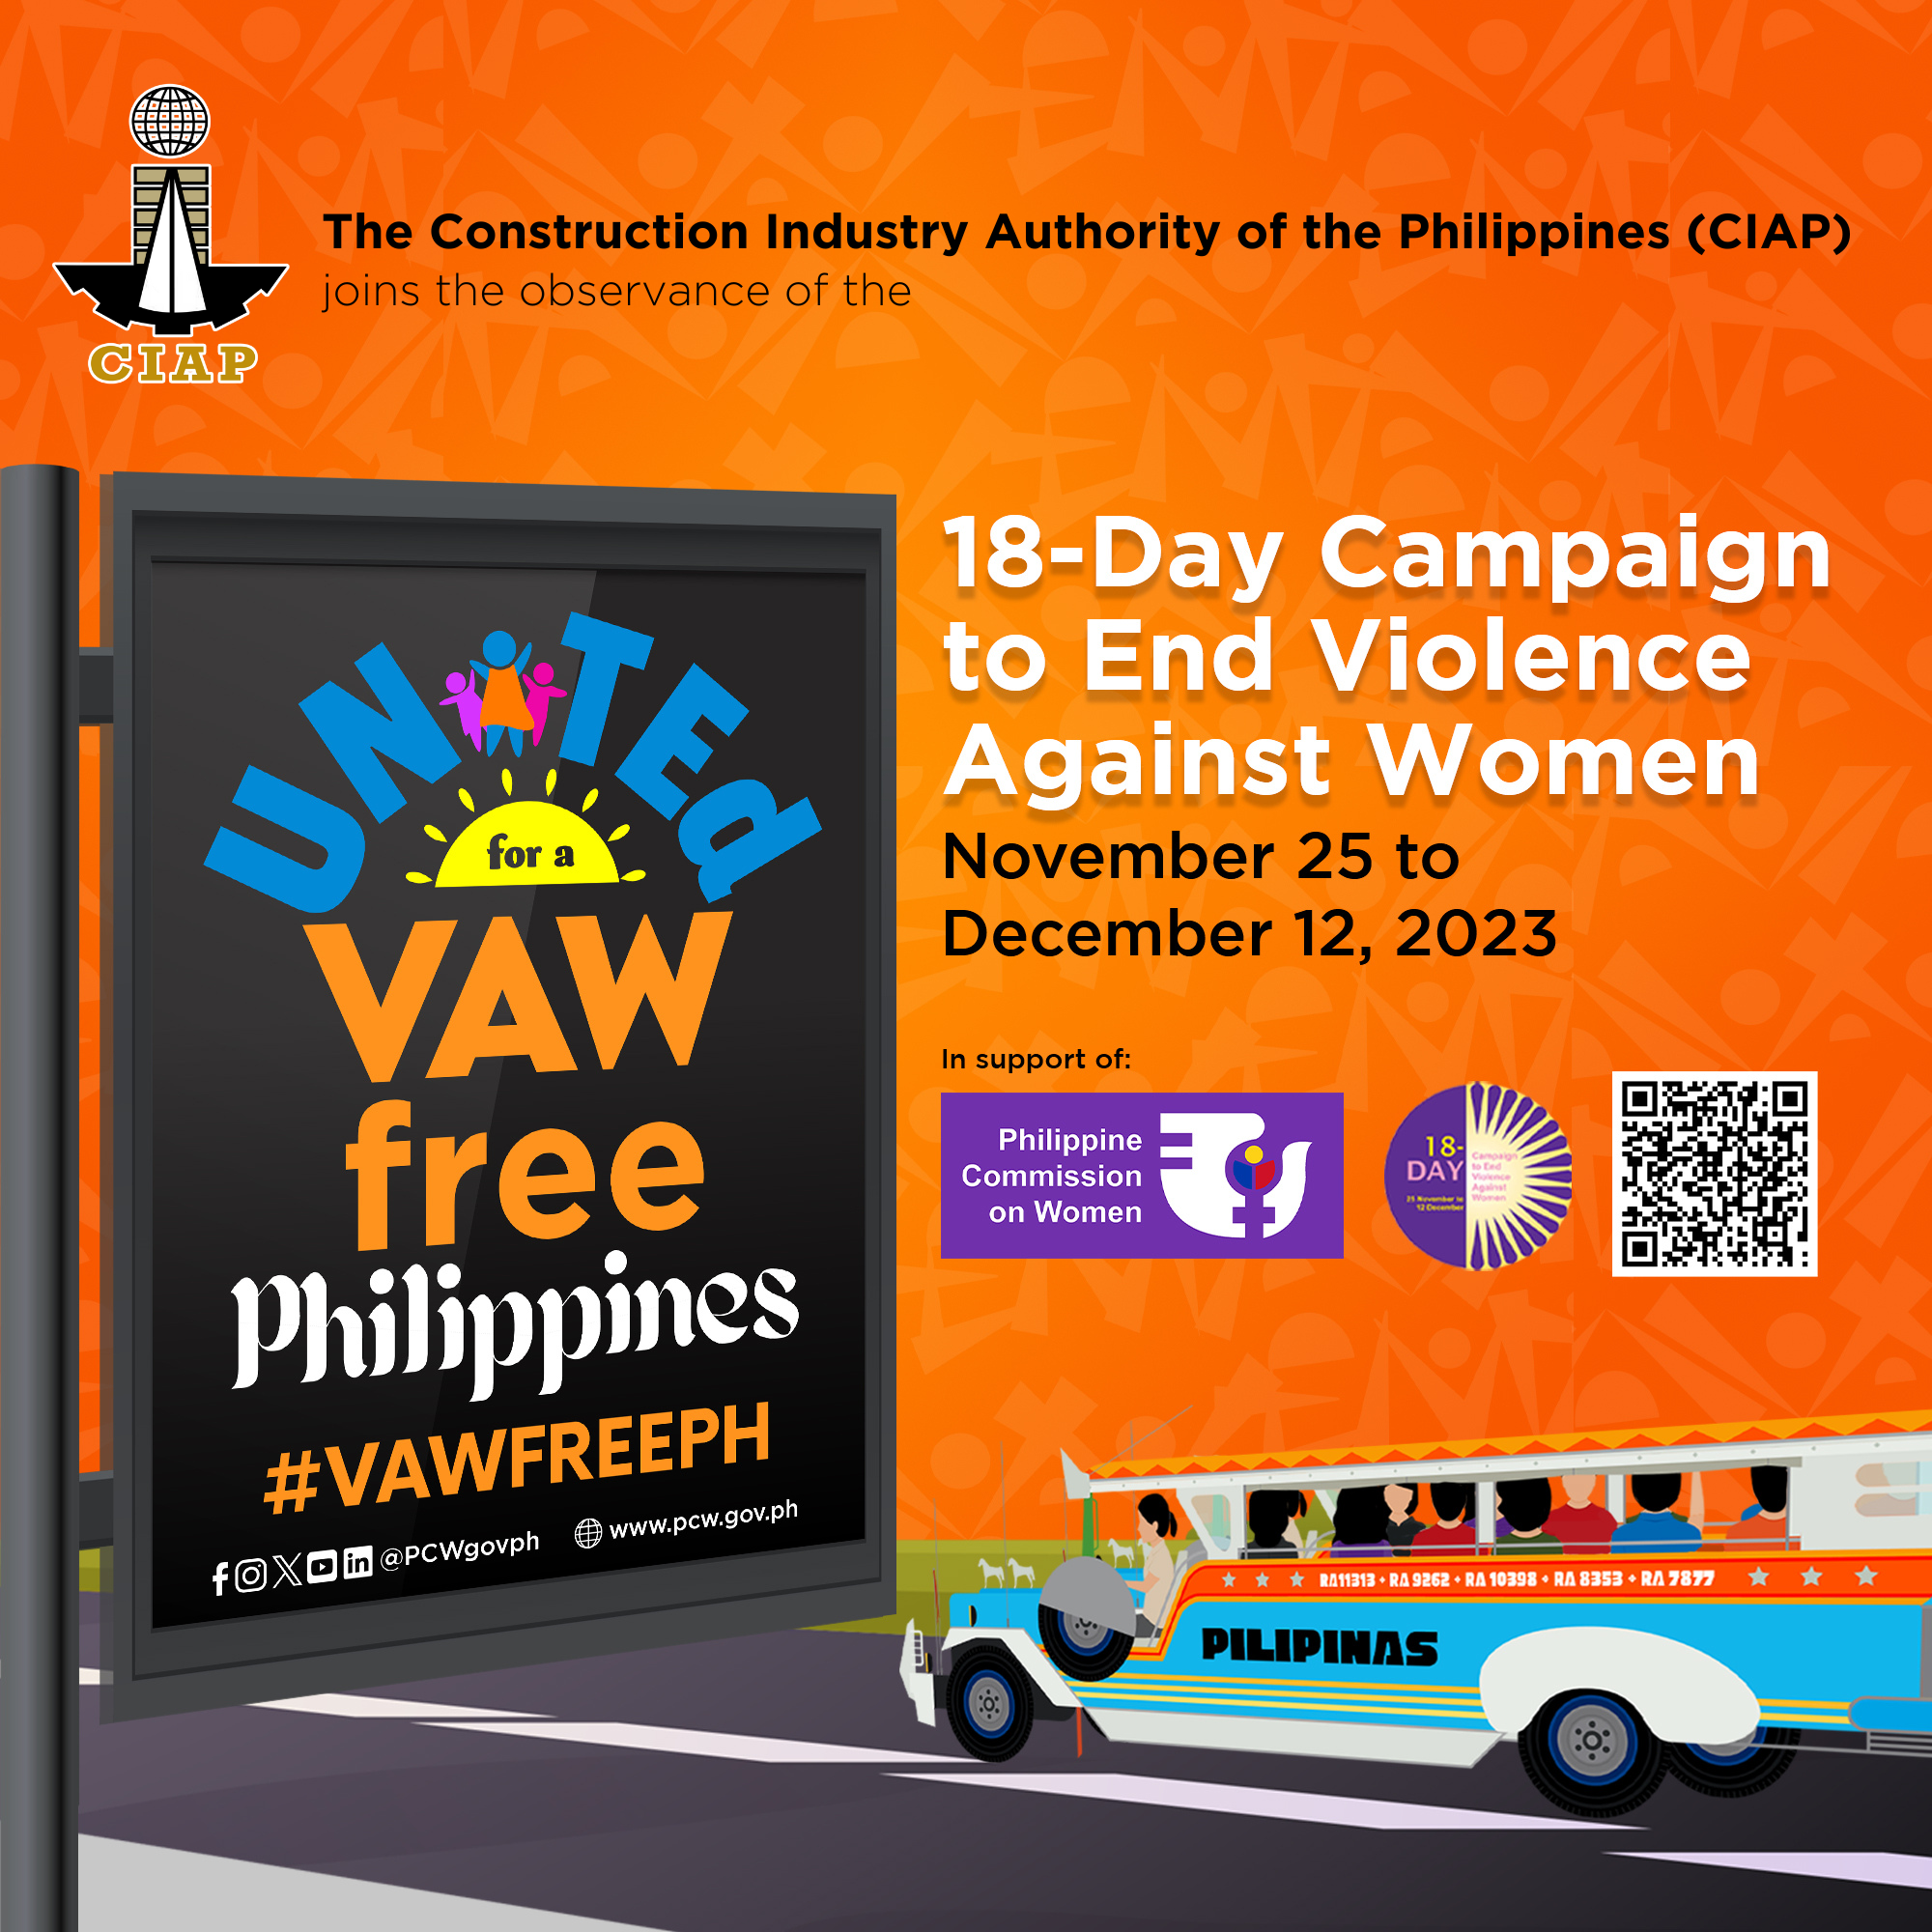 CIAP joins the National 18-day Campaign to End Violence Against Women